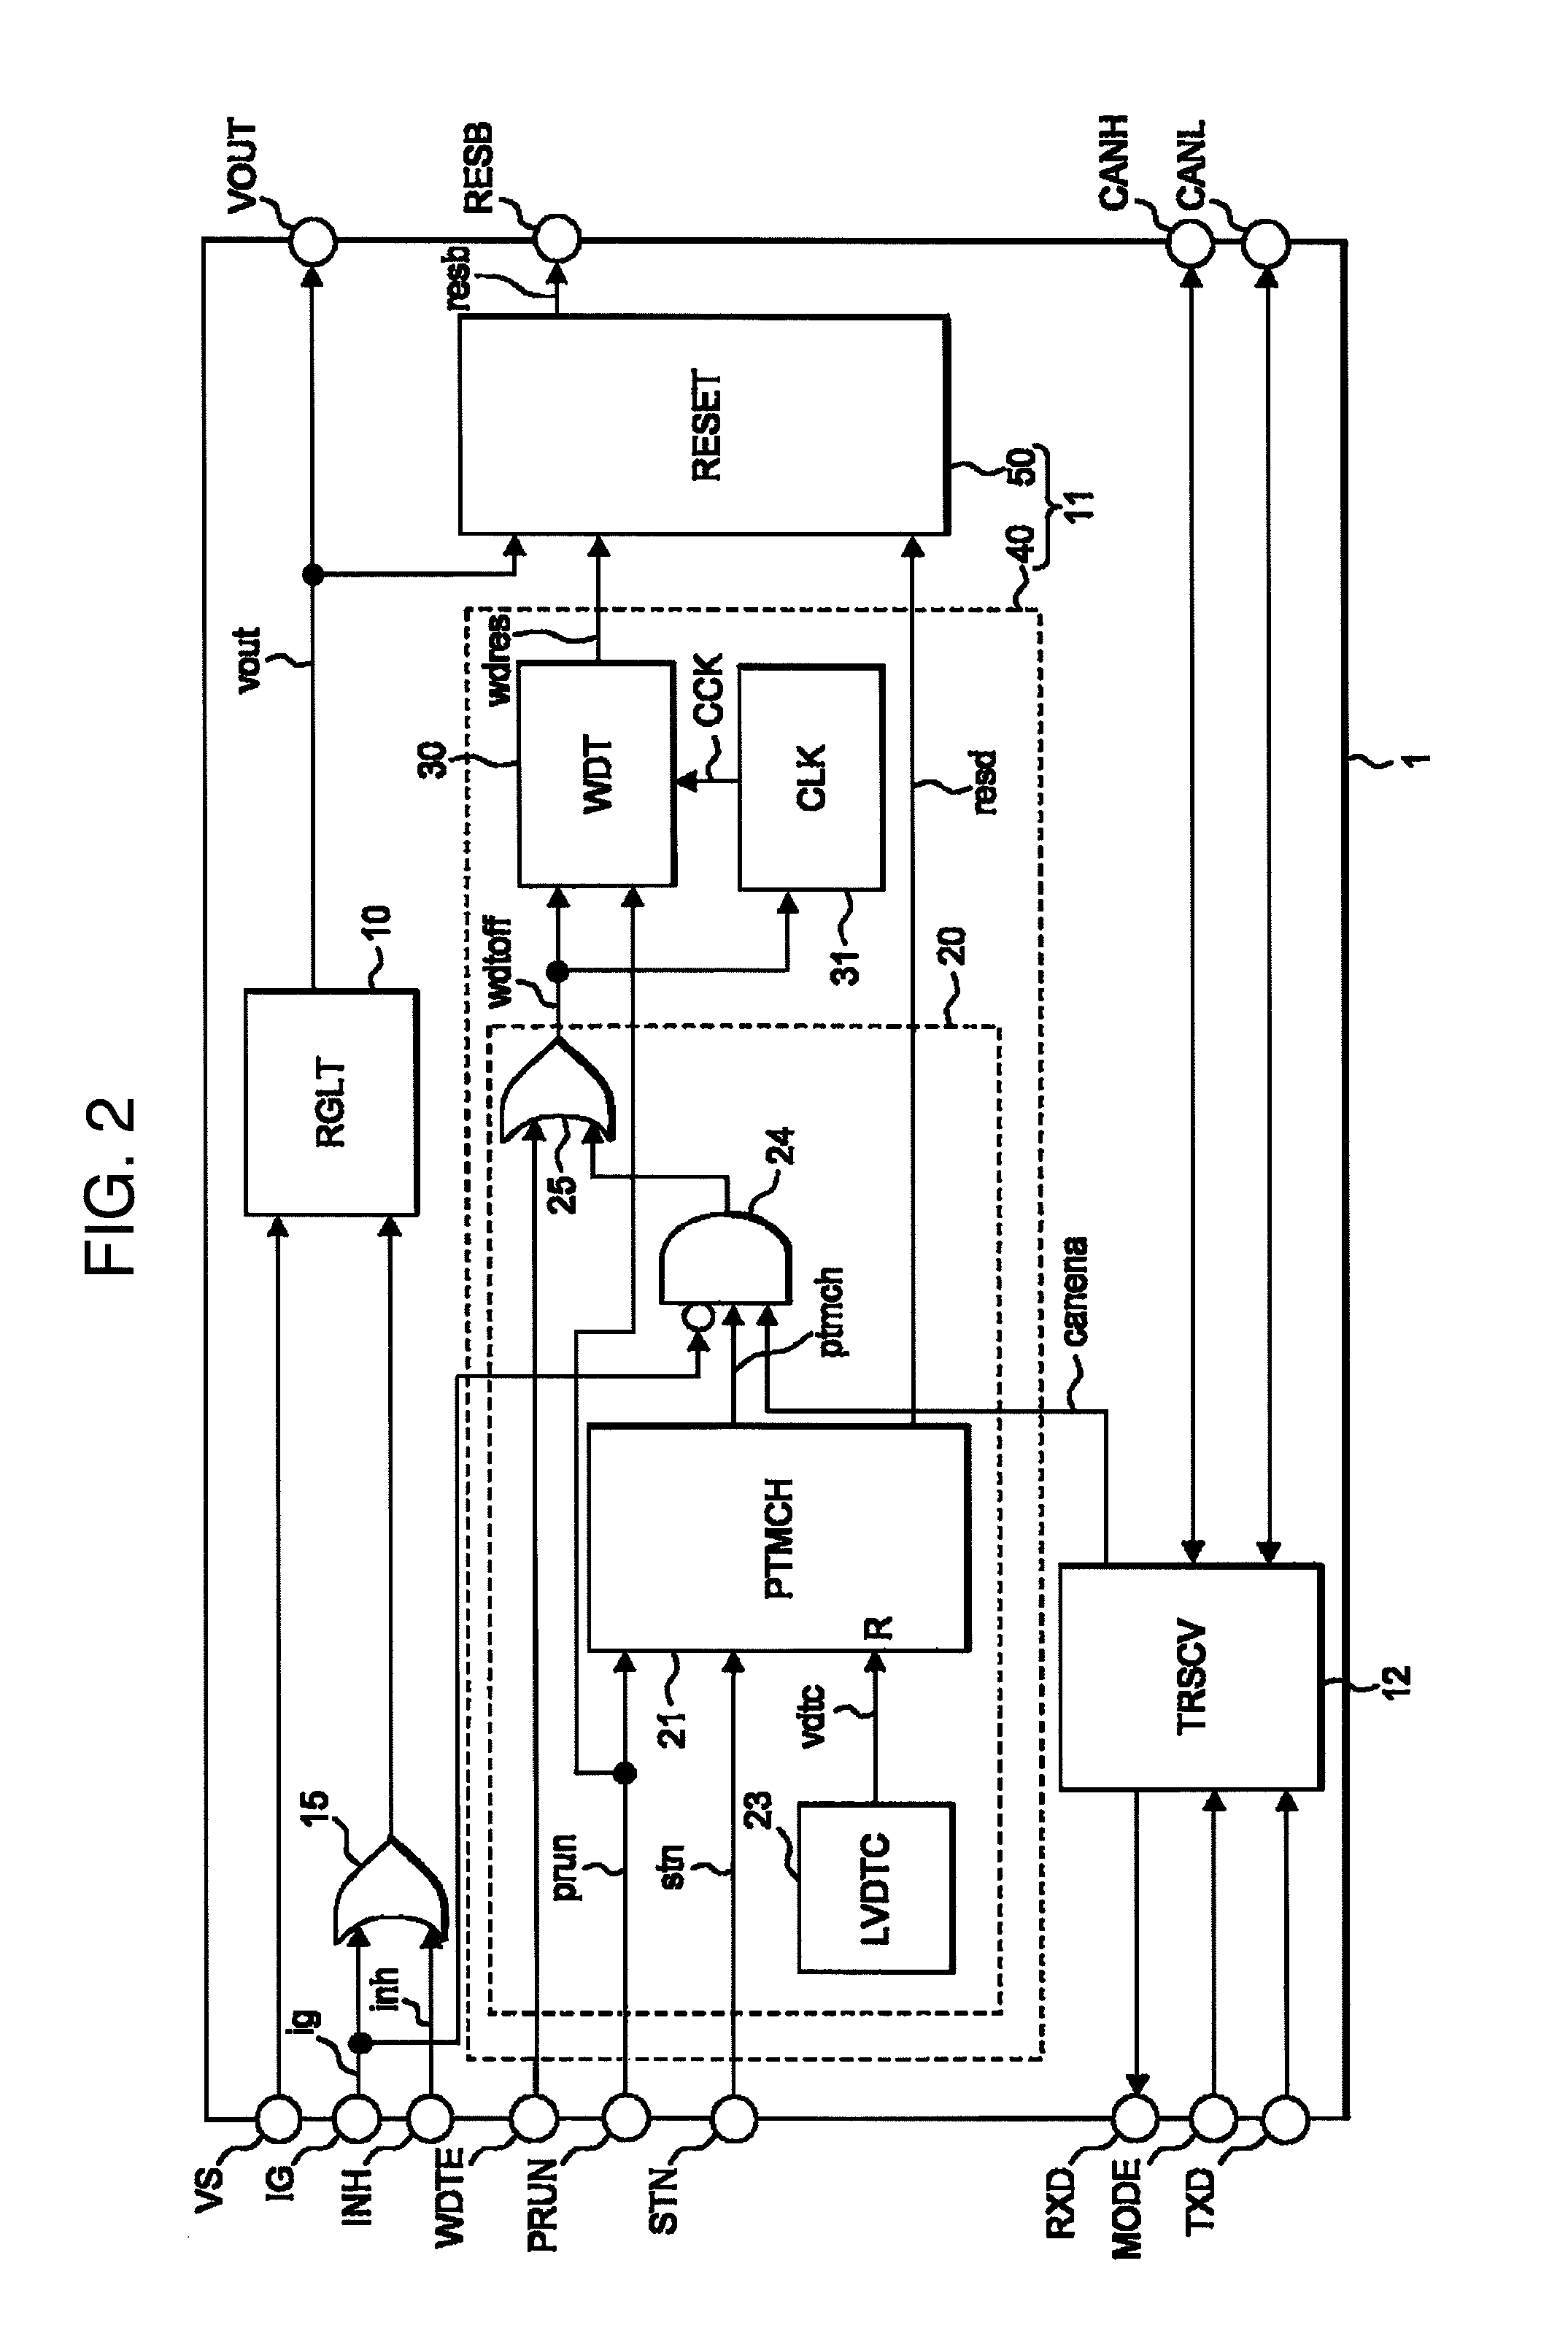 Watchdog circuit, power IC and watchdog monitor system